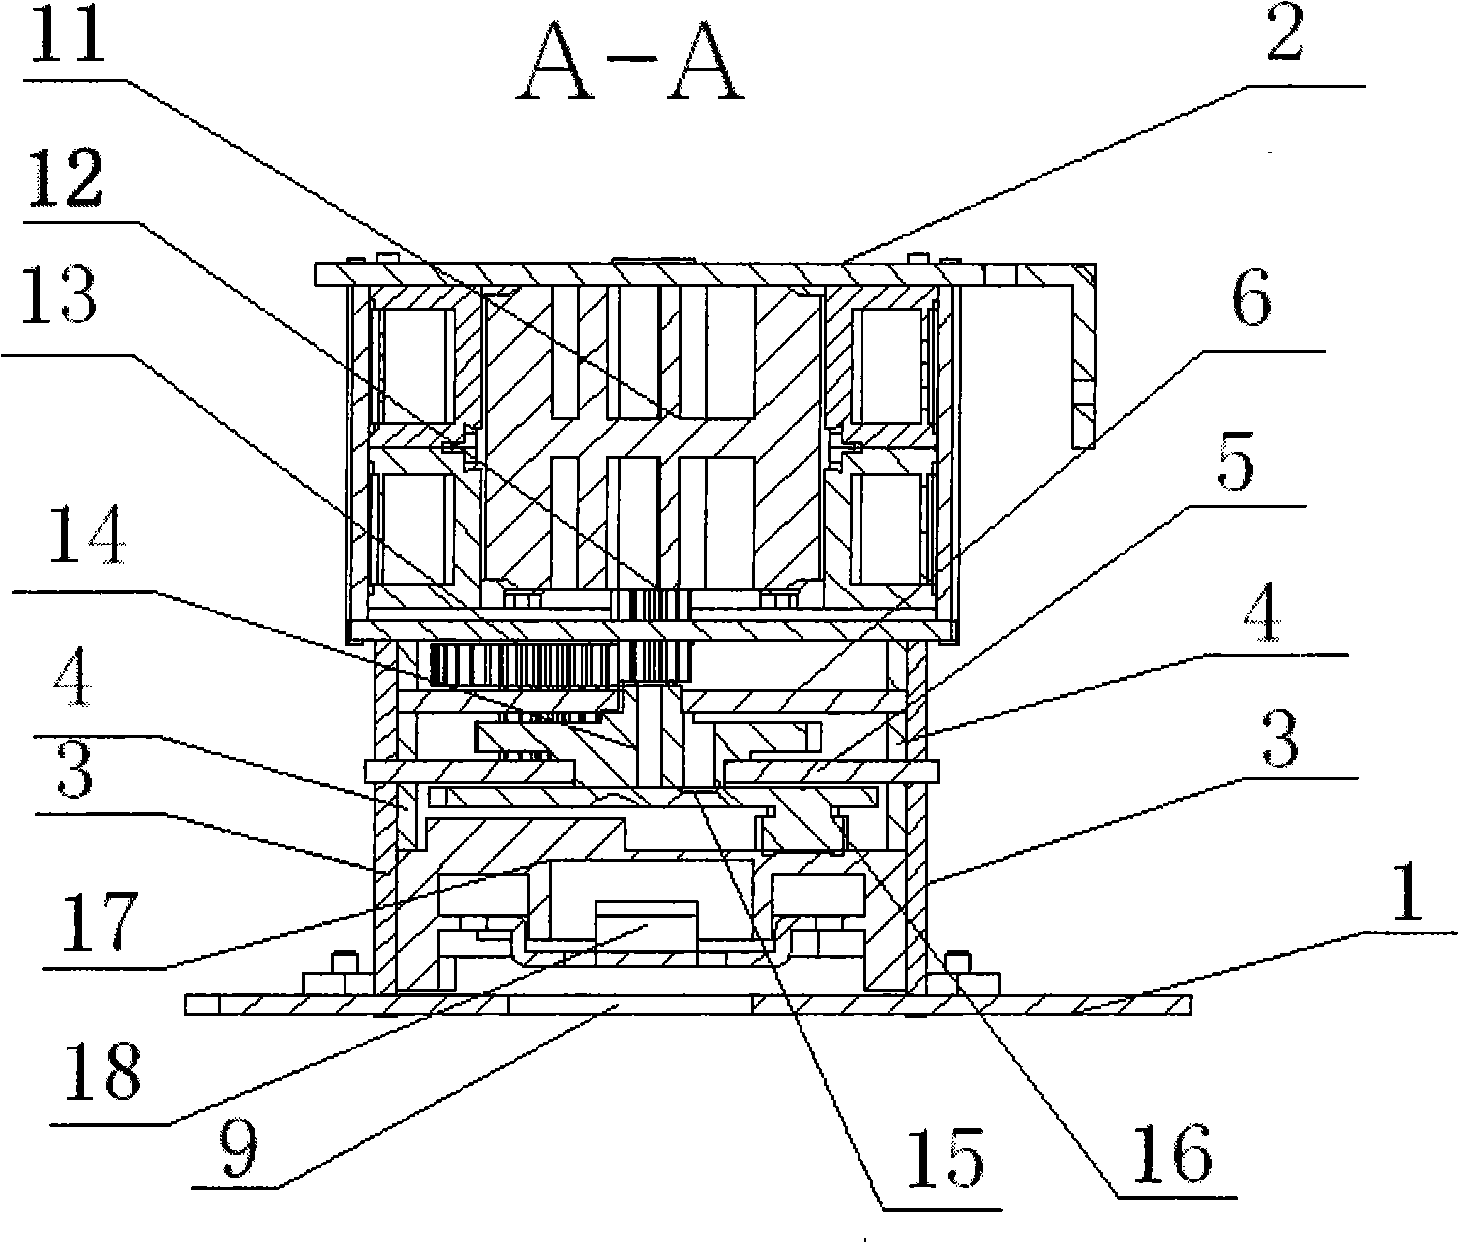 Electrically-operated mechanism